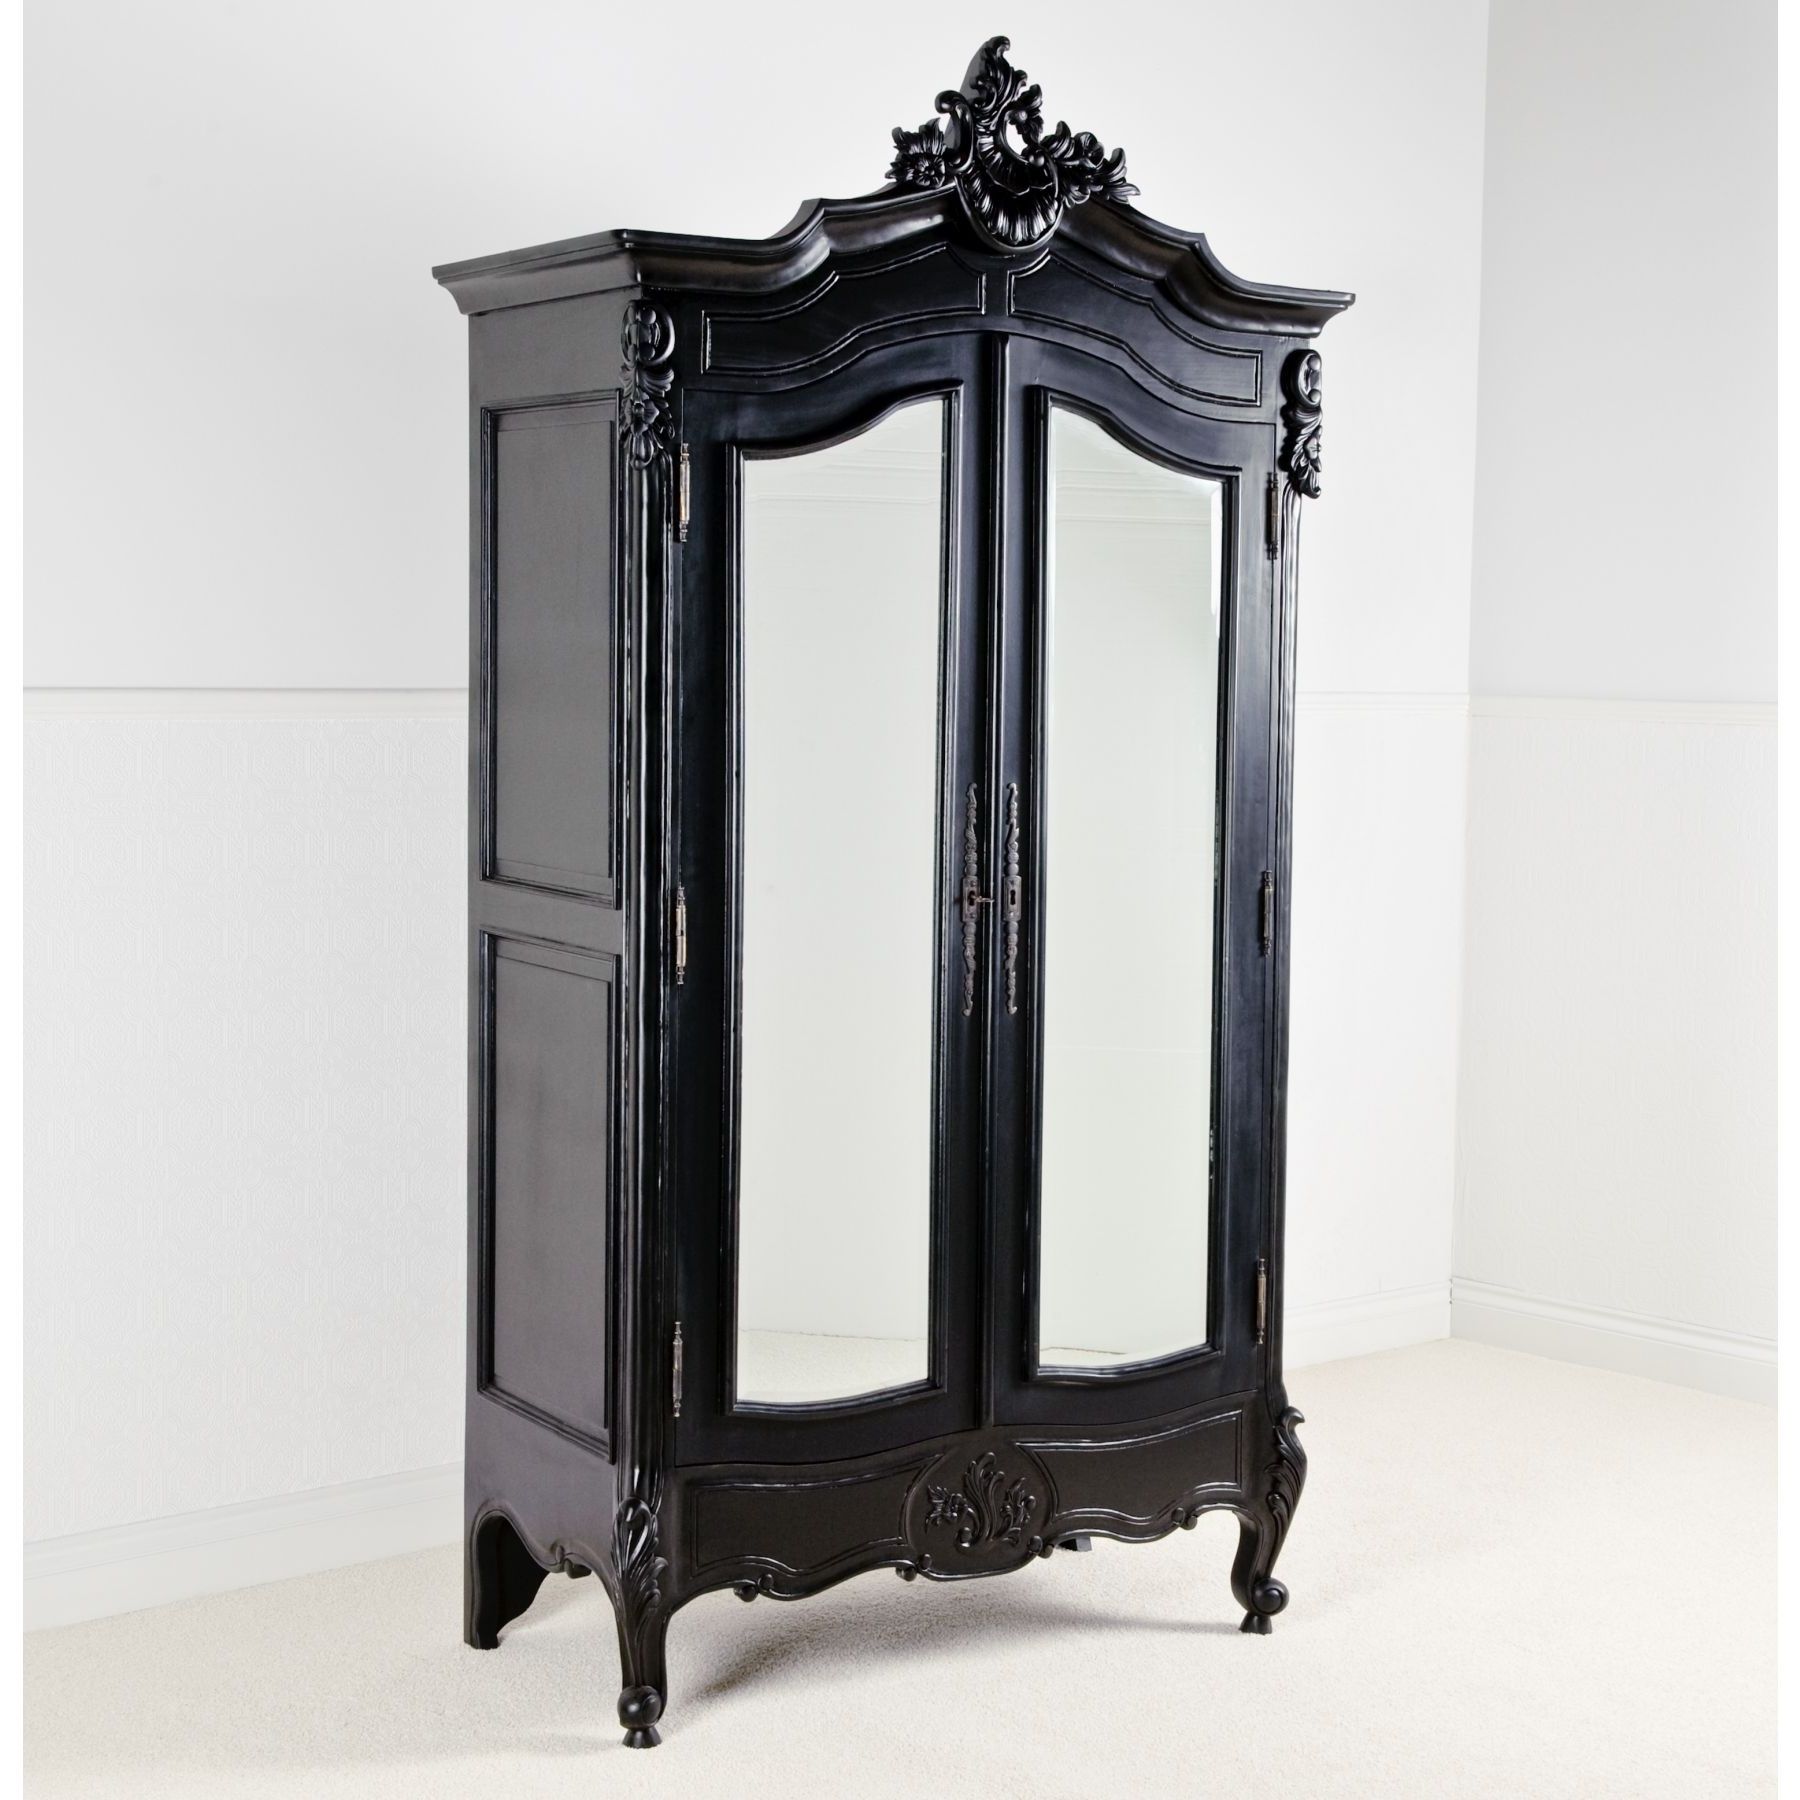 French Wardrobes » La Rochelle Black Antique French Wardrobe Intended For Trendy Black French Style Wardrobes (View 3 of 15)